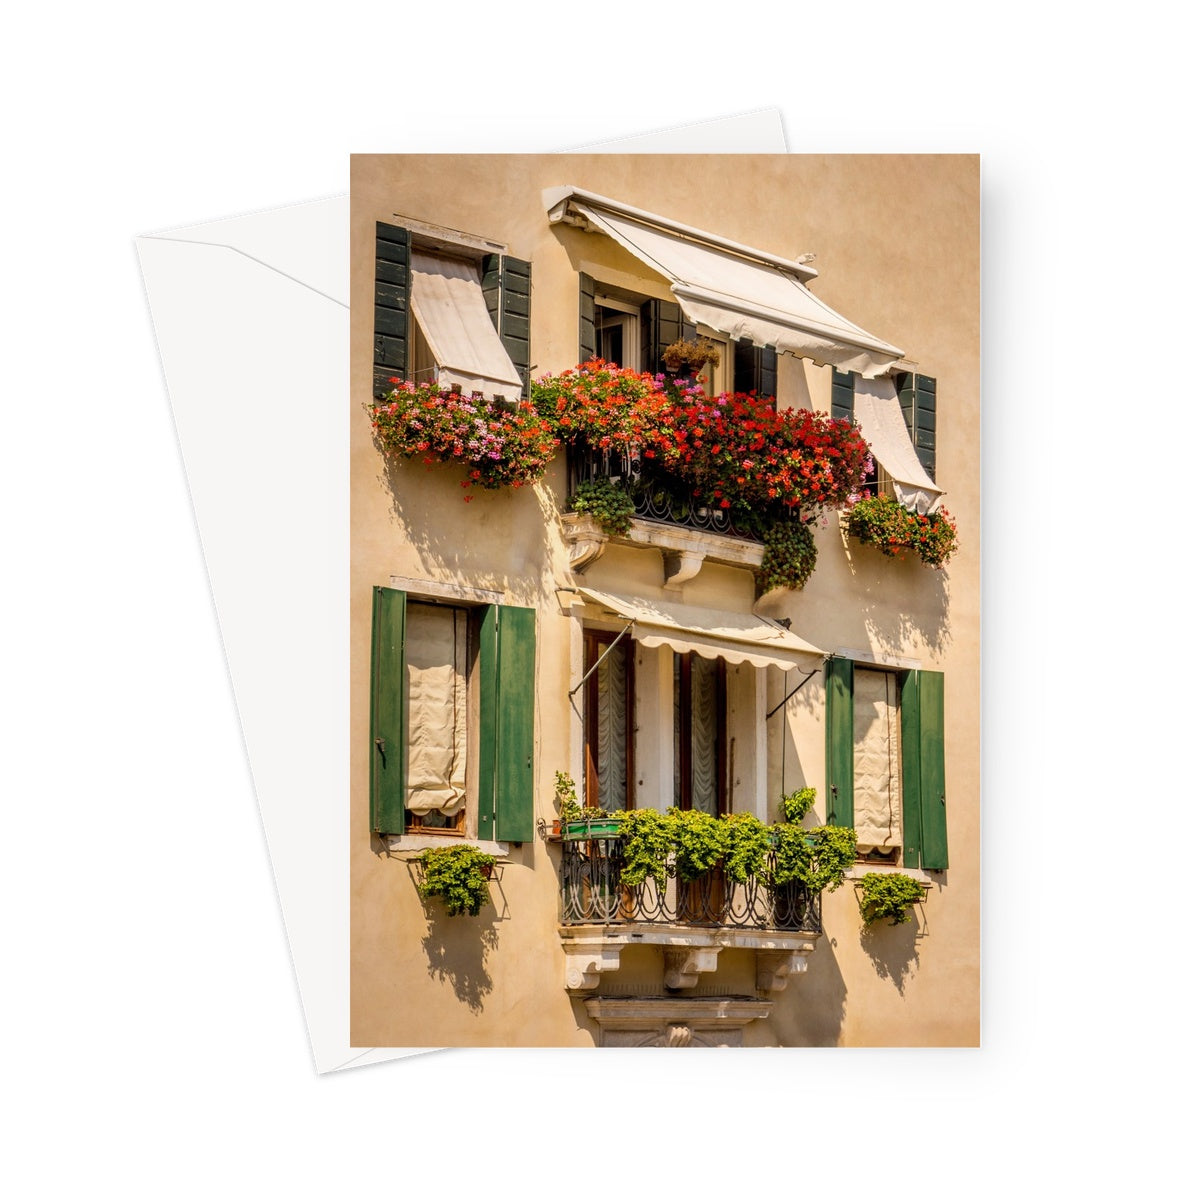 Traditional canal-side cream-rendered house with shuttered windows and window boxes. Venice. Italy. Greeting Card